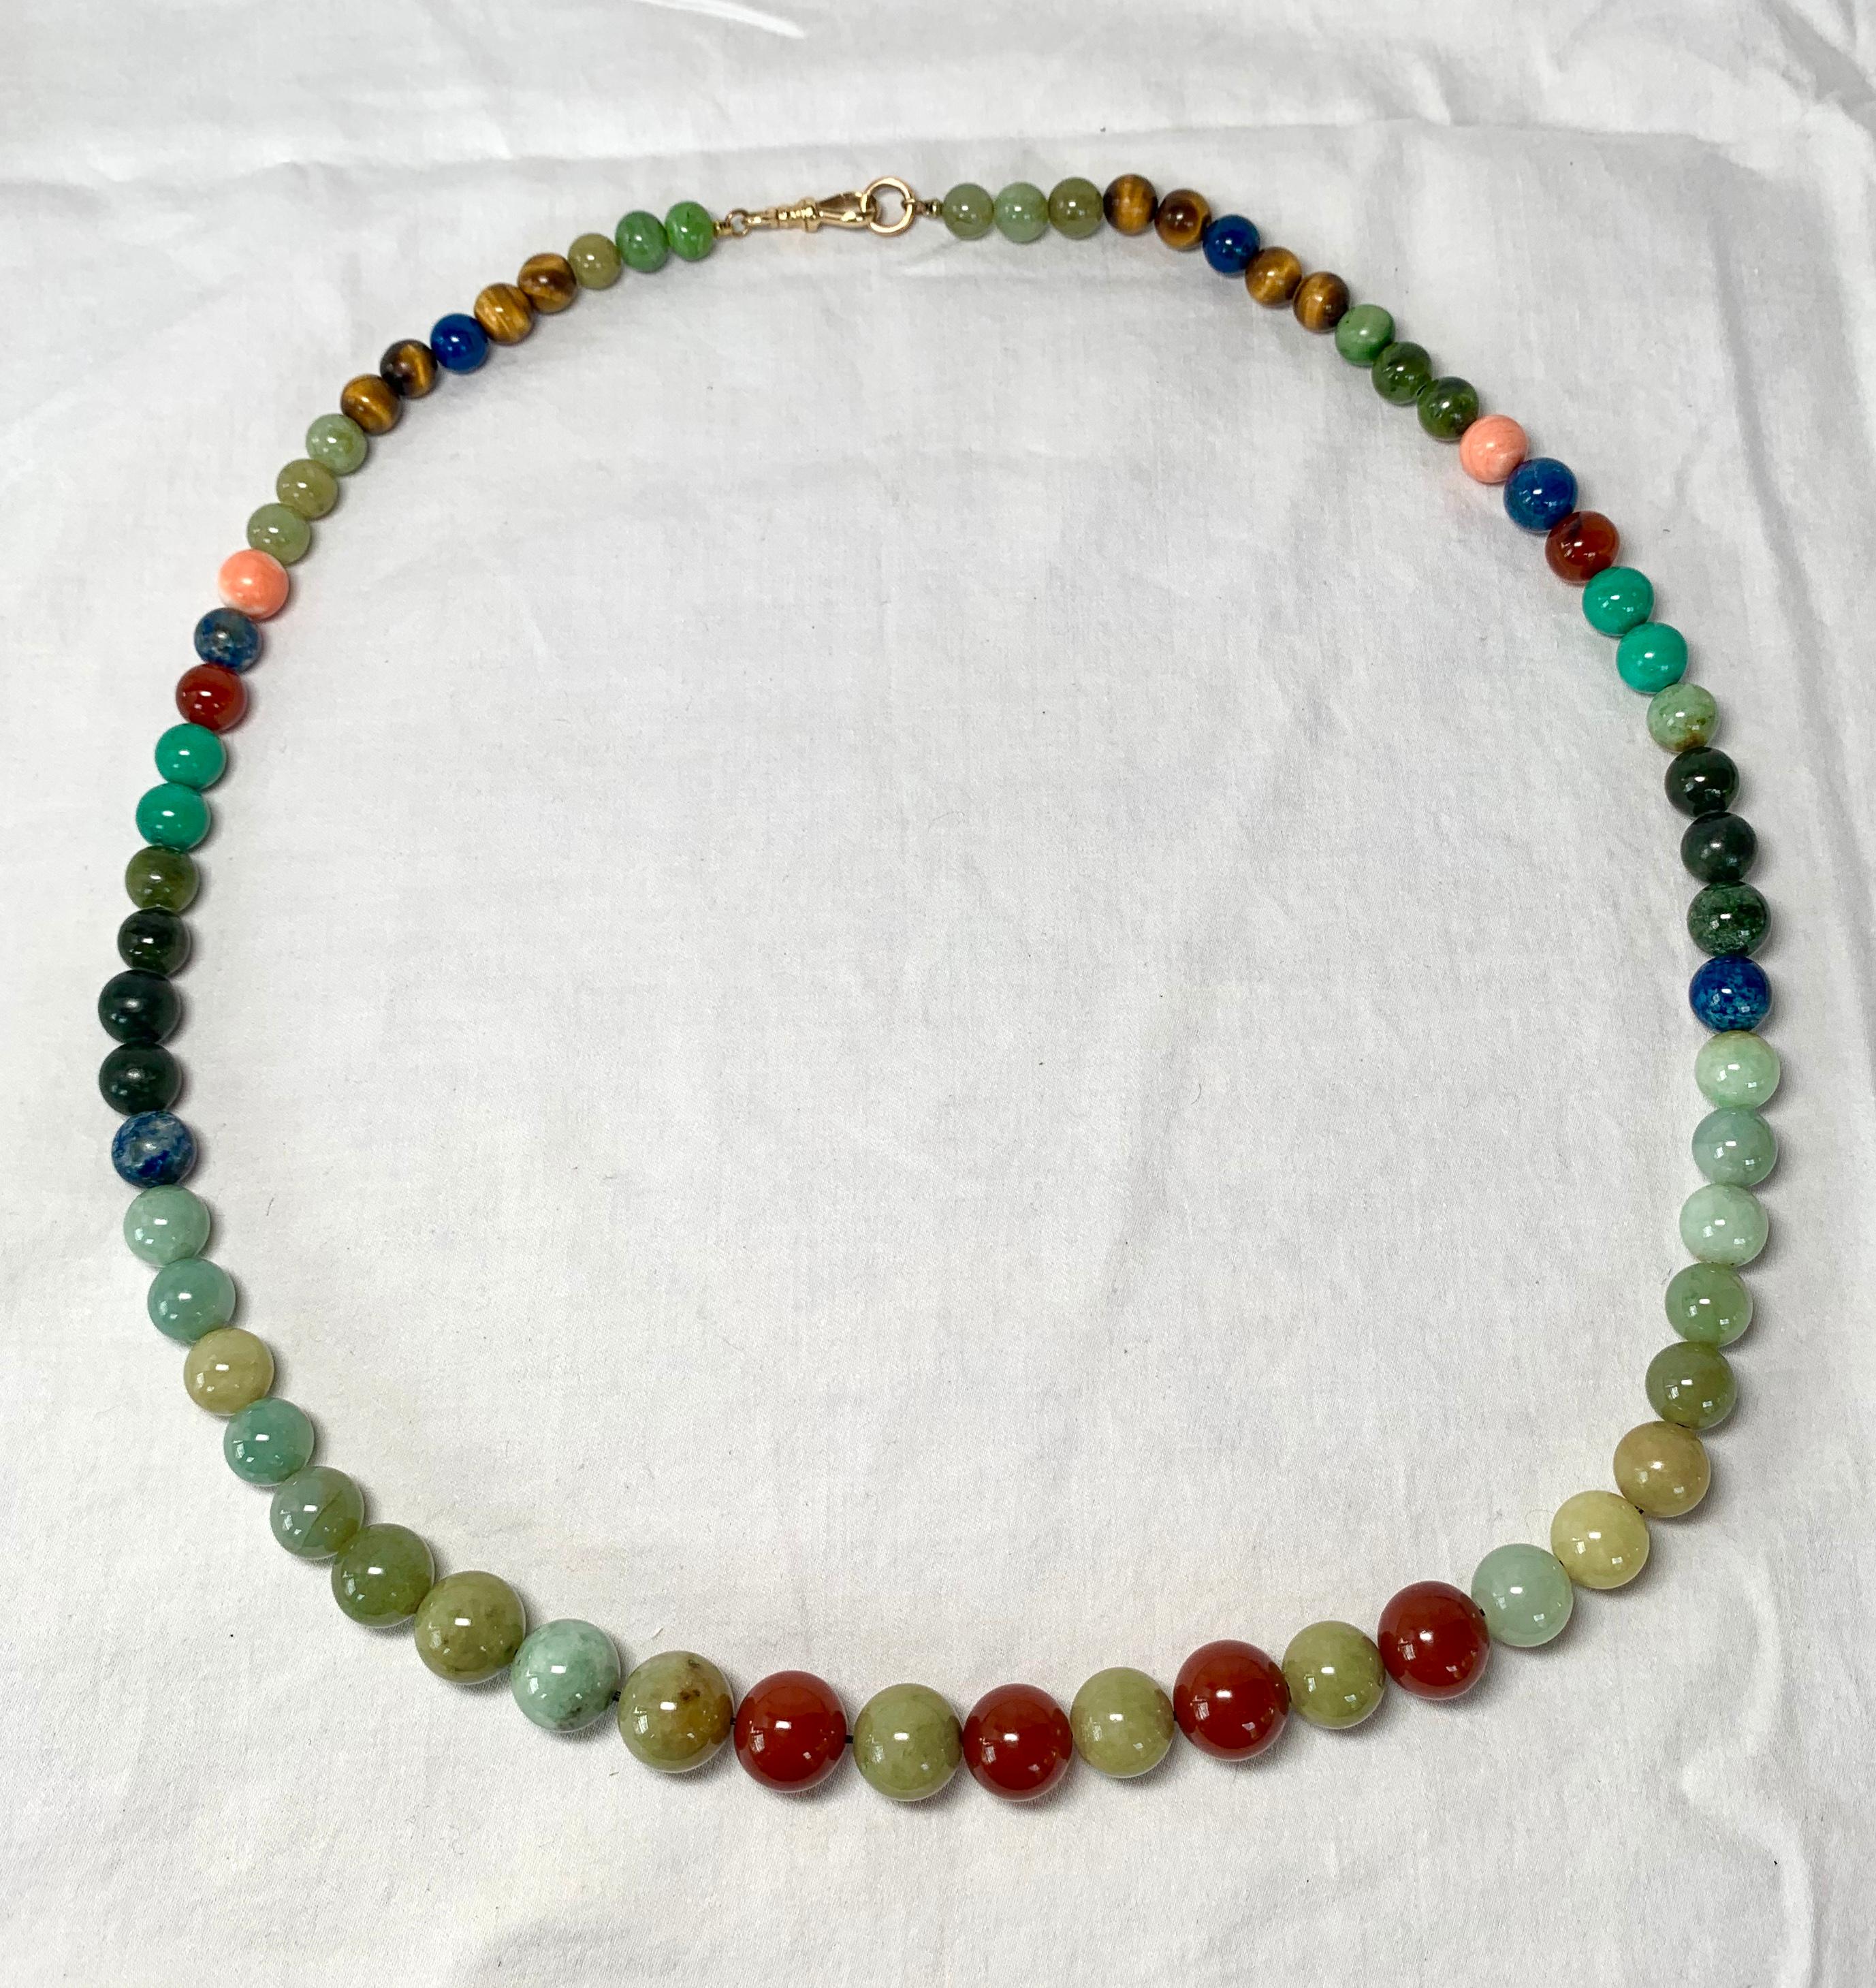 A spectacular natural mined gemstone necklace with graduated beads of Jade, Carnelian, Lapis Lazuli, Malachite, and Tiger's Eye with a rare and wonderful Dog Clip Clasp in 14 Karat Gold.  The necklace is 26 inches (63 cm) long.    The graduated